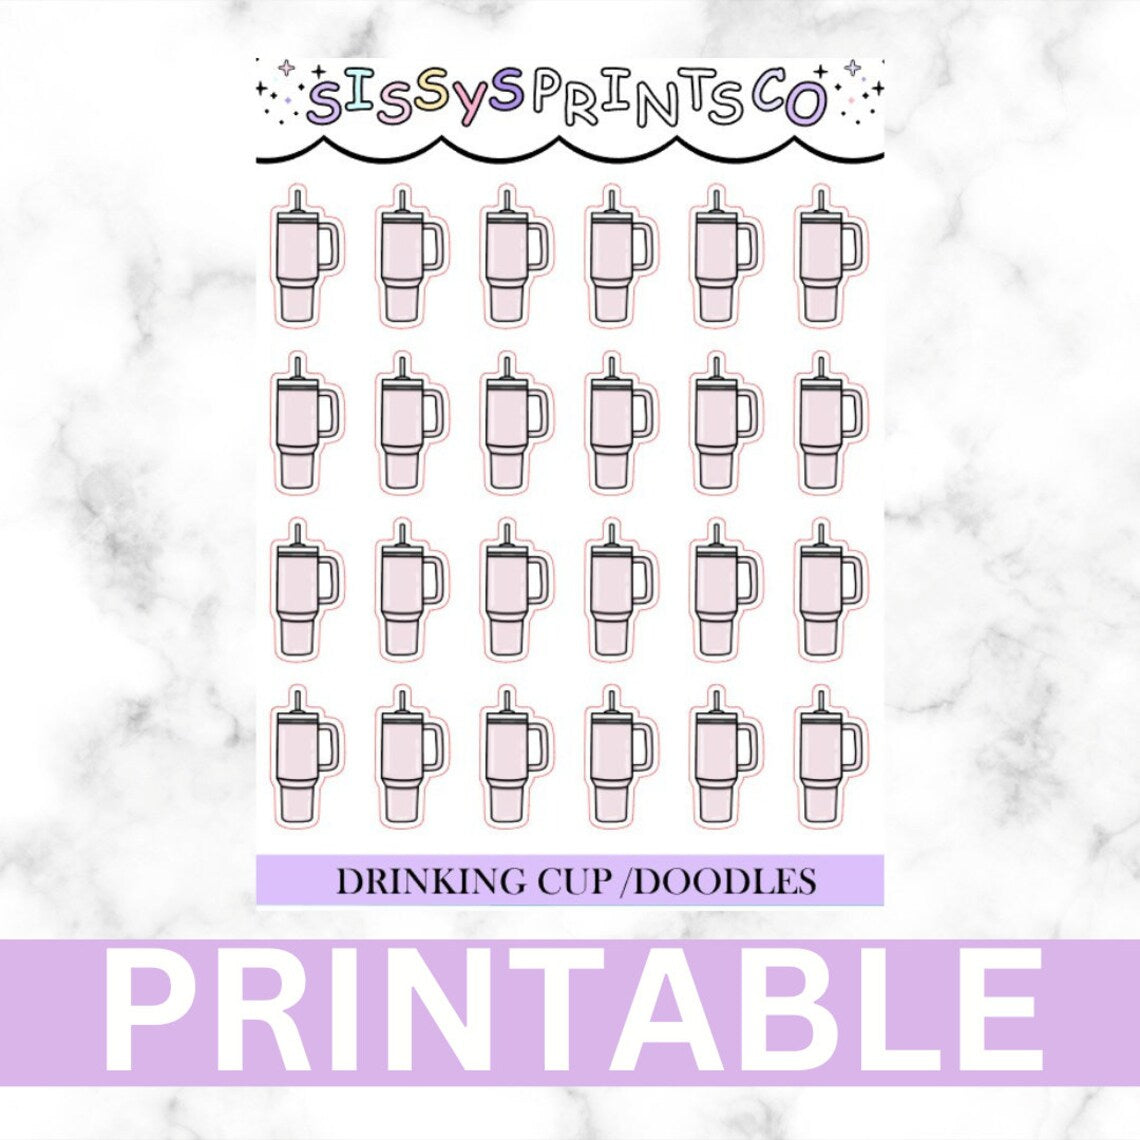 Drinking cup / printable doodles